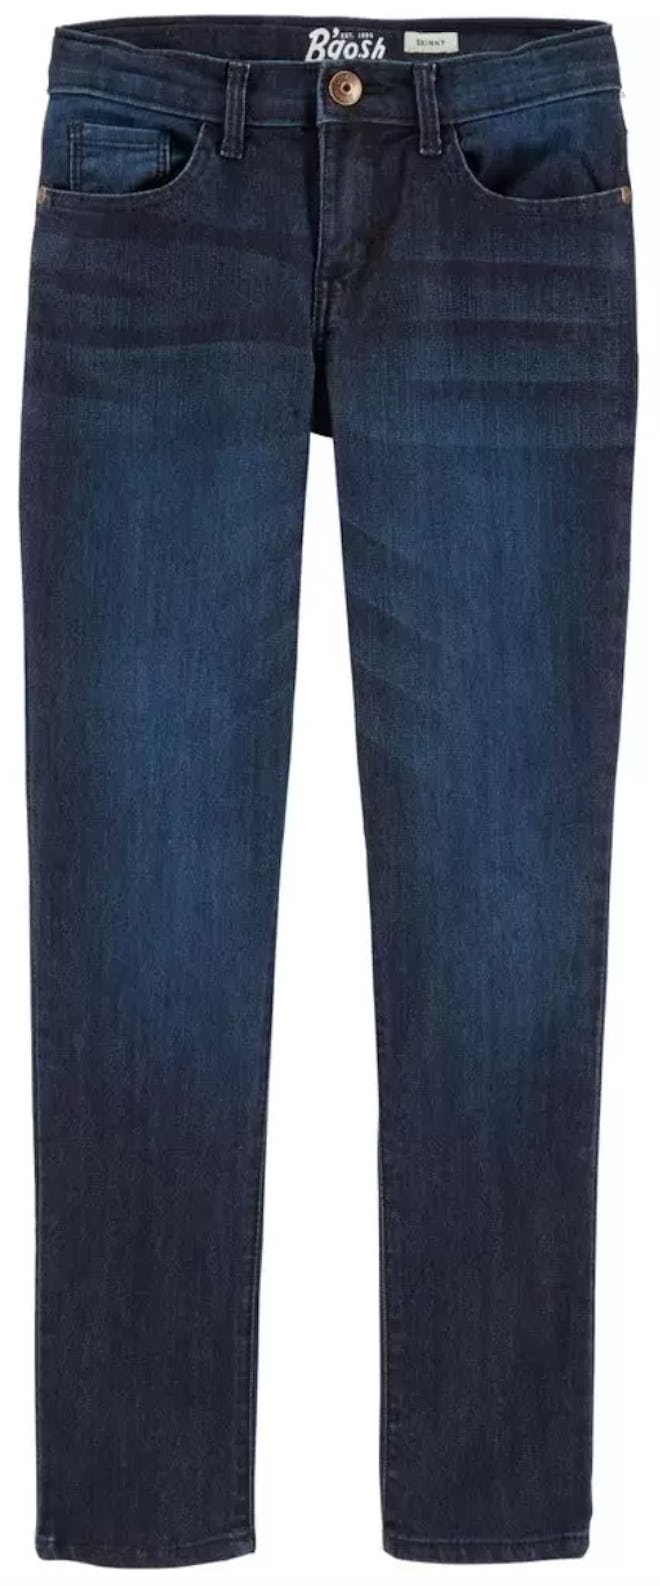 Girls Skinny Jeans In Heritage Rinse are part of the OshKosh B'gosh Labor Day sale.